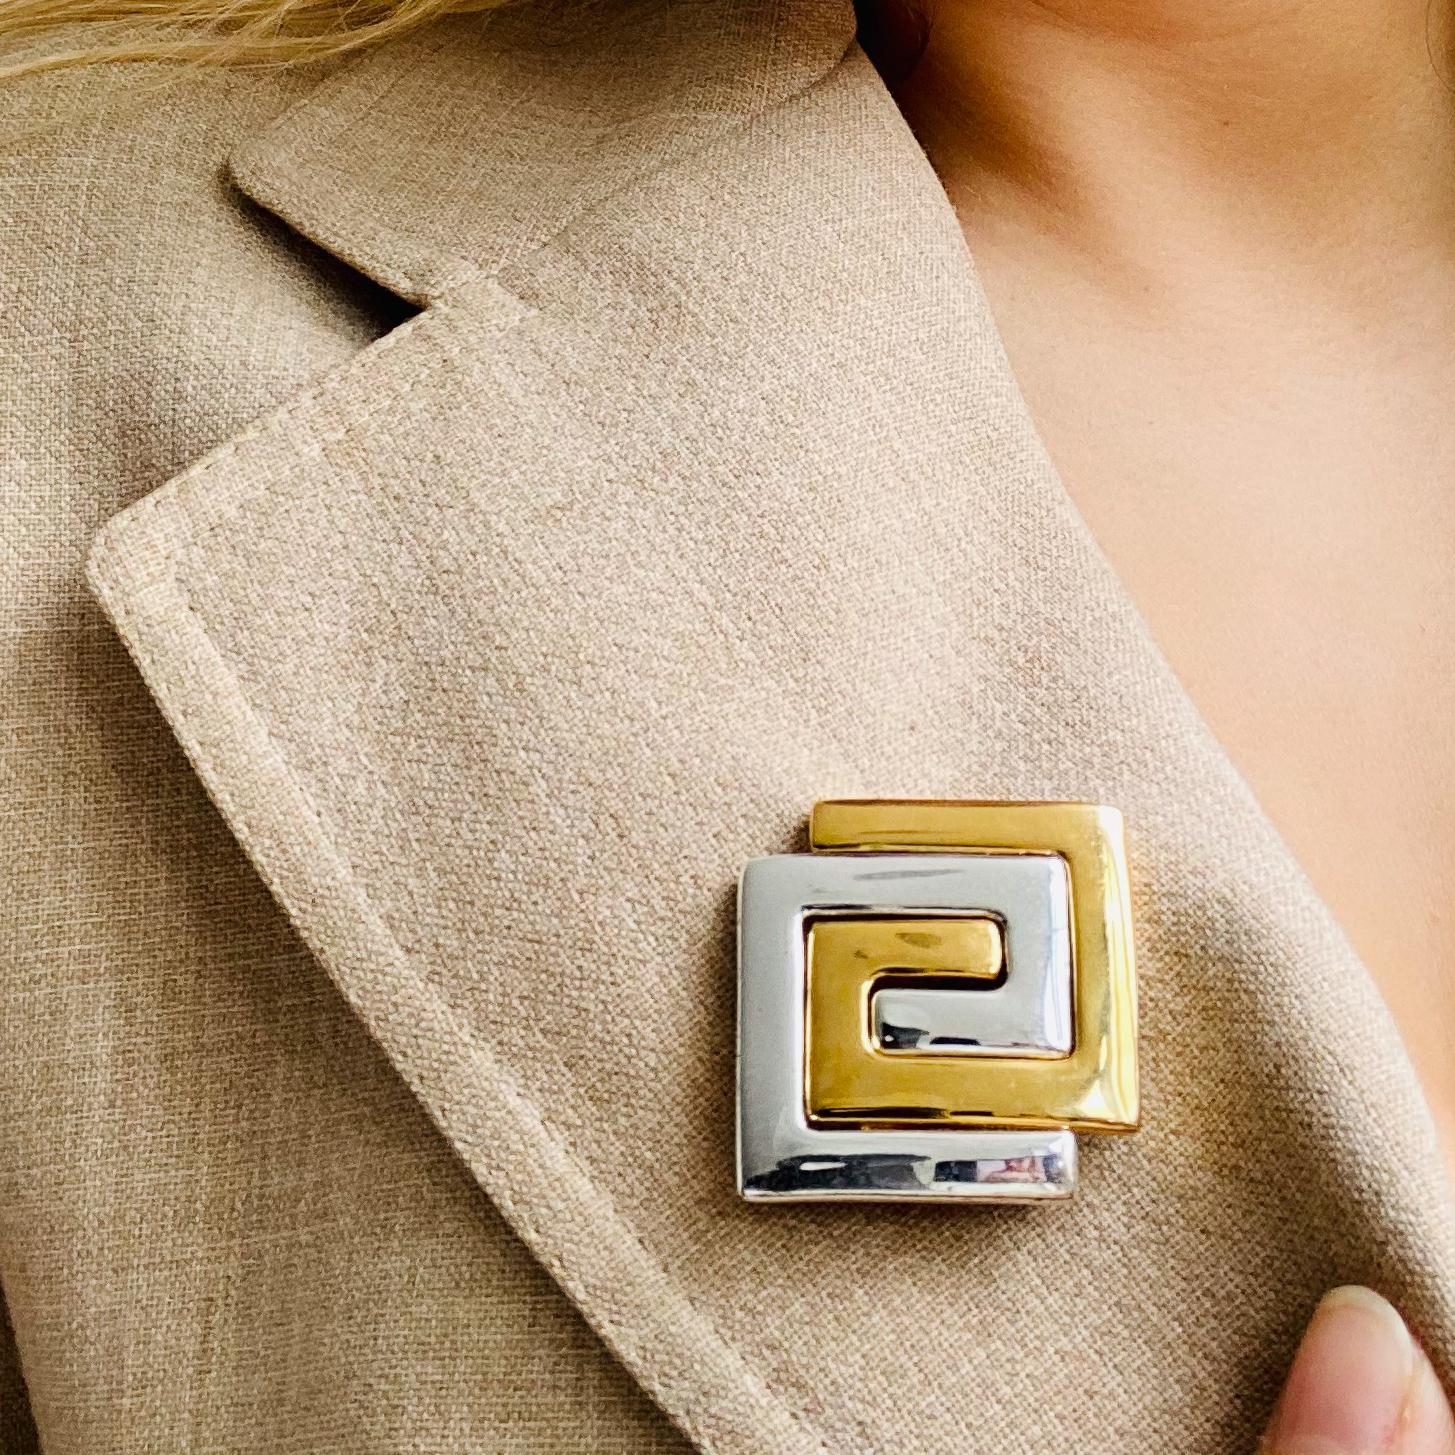 Givenchy 1980s Vintage Brooch.

Detail
-Made in France in the 1980s
-Features the Givenchy double G logo in a gold and silver coloured base metal 

Size & Fit
-Approx 3.3 cm x 3.3 cm / 1.3 inches x 1.3 inches

Authenticity & Condition
- Fully